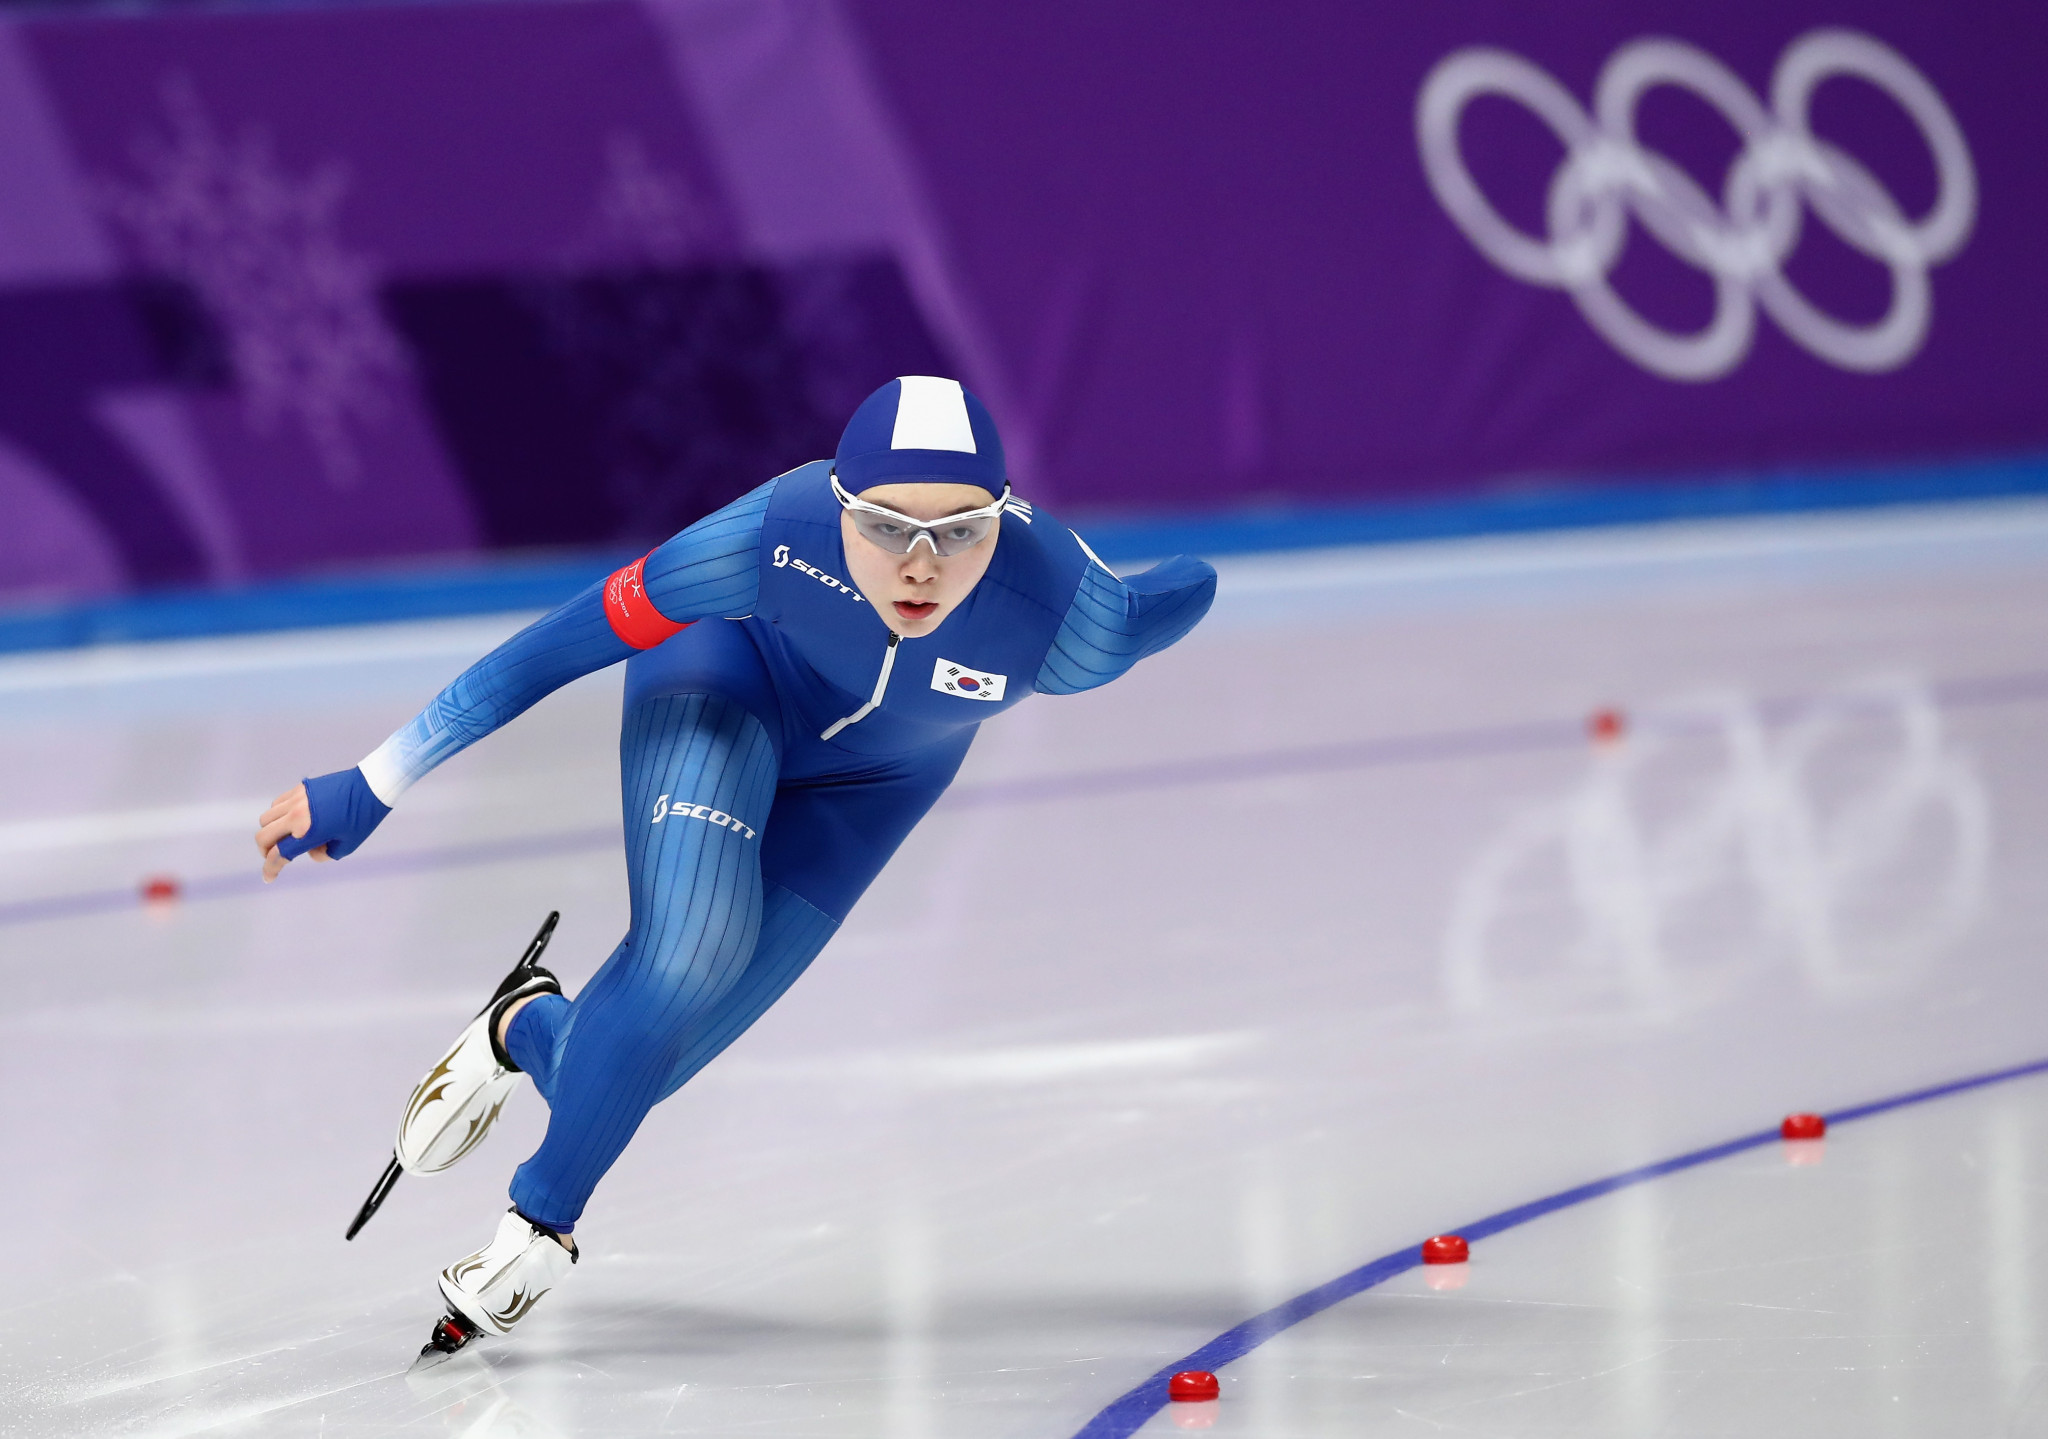 More than half-a-million people sign petition calling for South Korean speed skaters to be banned for bullying